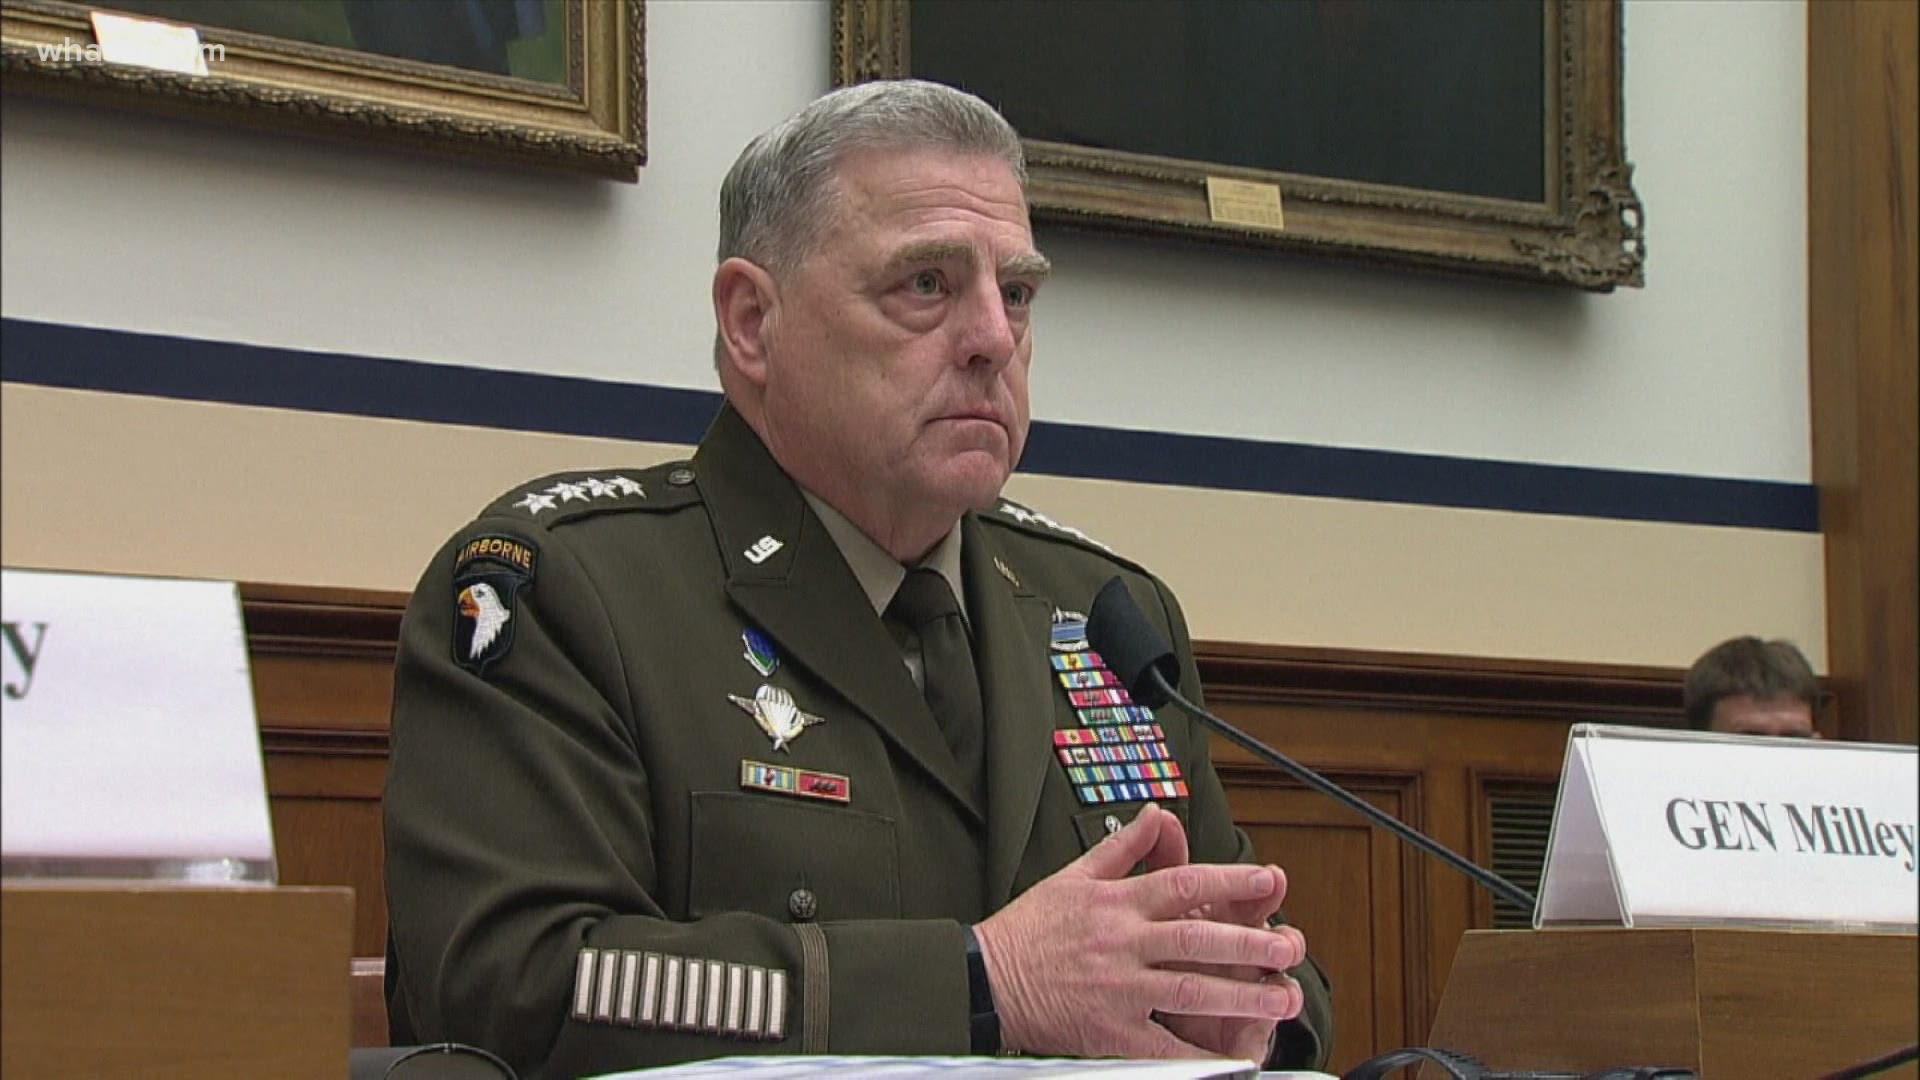 Gen. Mark Milley, the chairman of the Joint Chiefs of Staff, defended the right of West Point students to discuss race after some Republican congressmen complained.